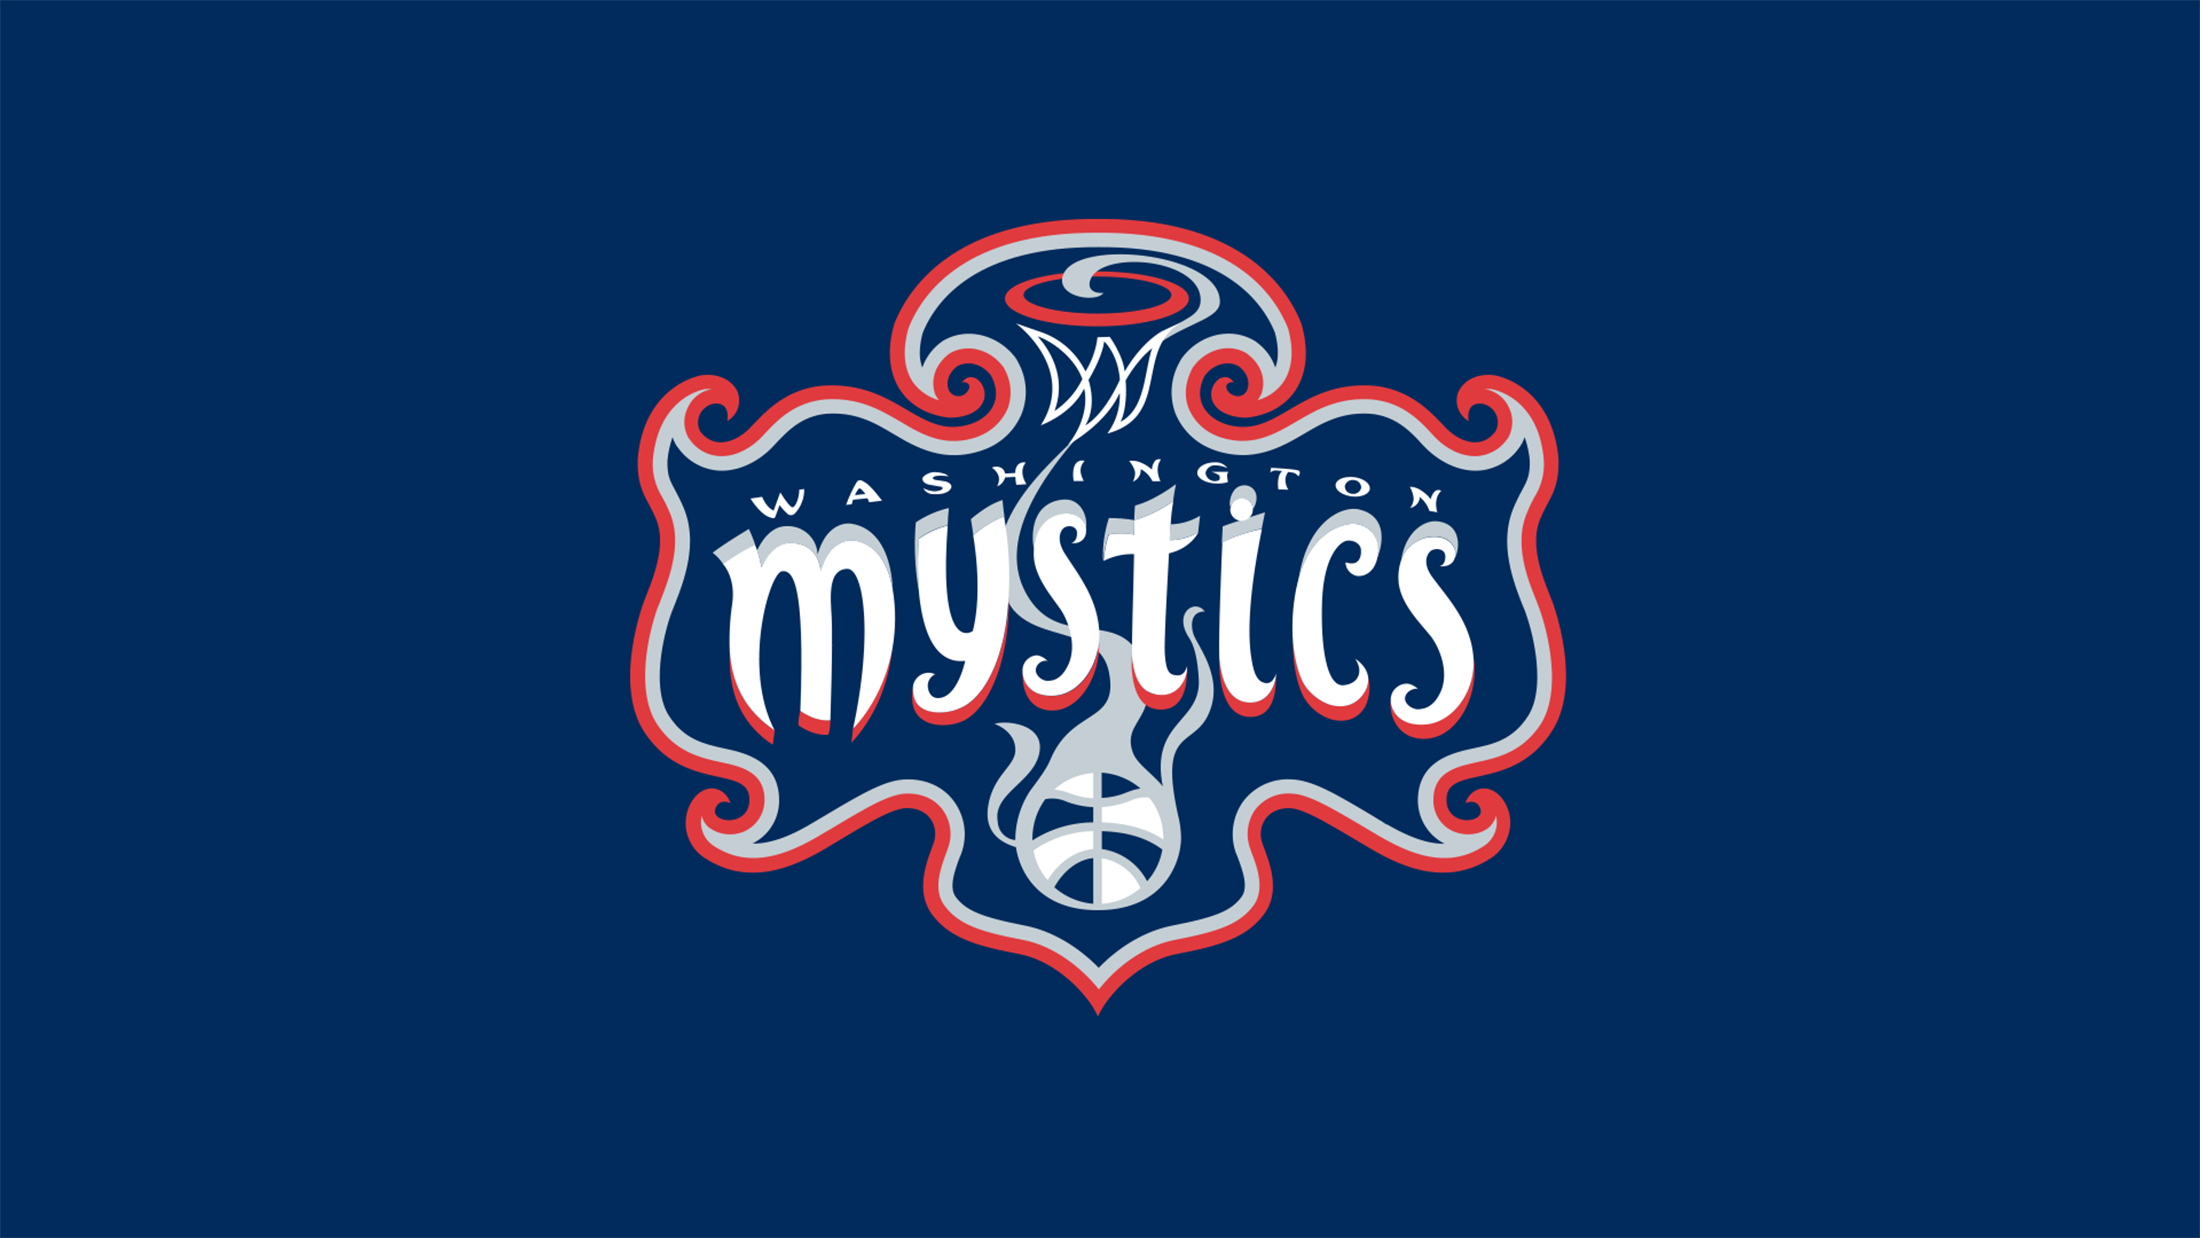 Mystics vs. Aces (Sneakerhead Keychain Giveaway - First 1,500 Fans)